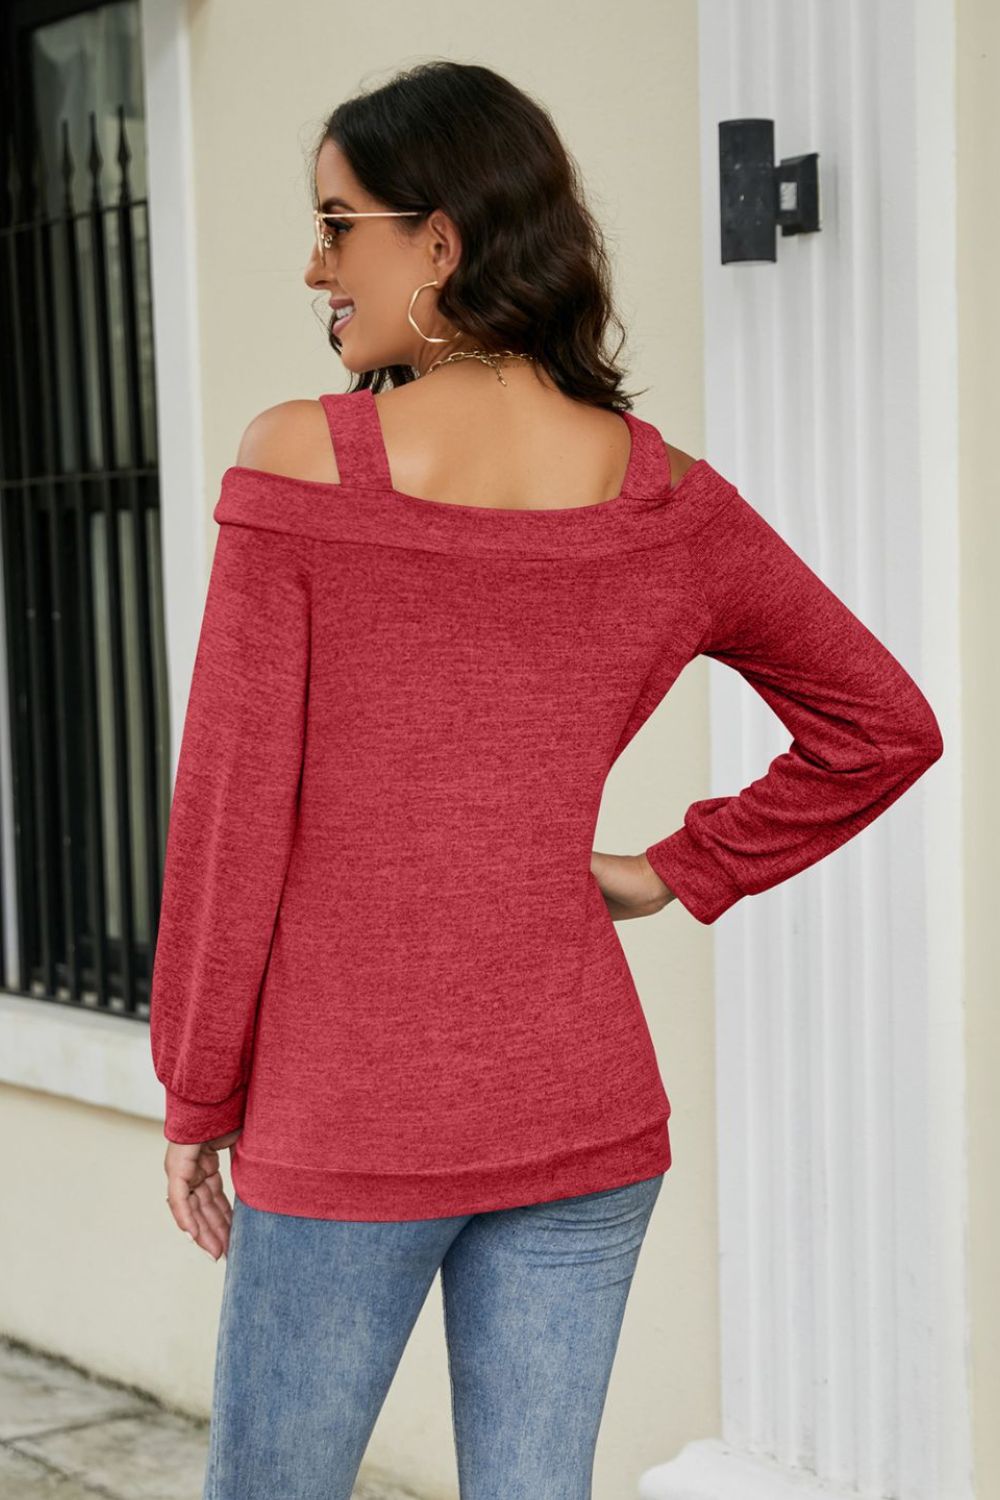 Cutout Cold-Shoulder Top - red cold shoulder long sleeve top with square neckline. Firefly Lane Boutique1